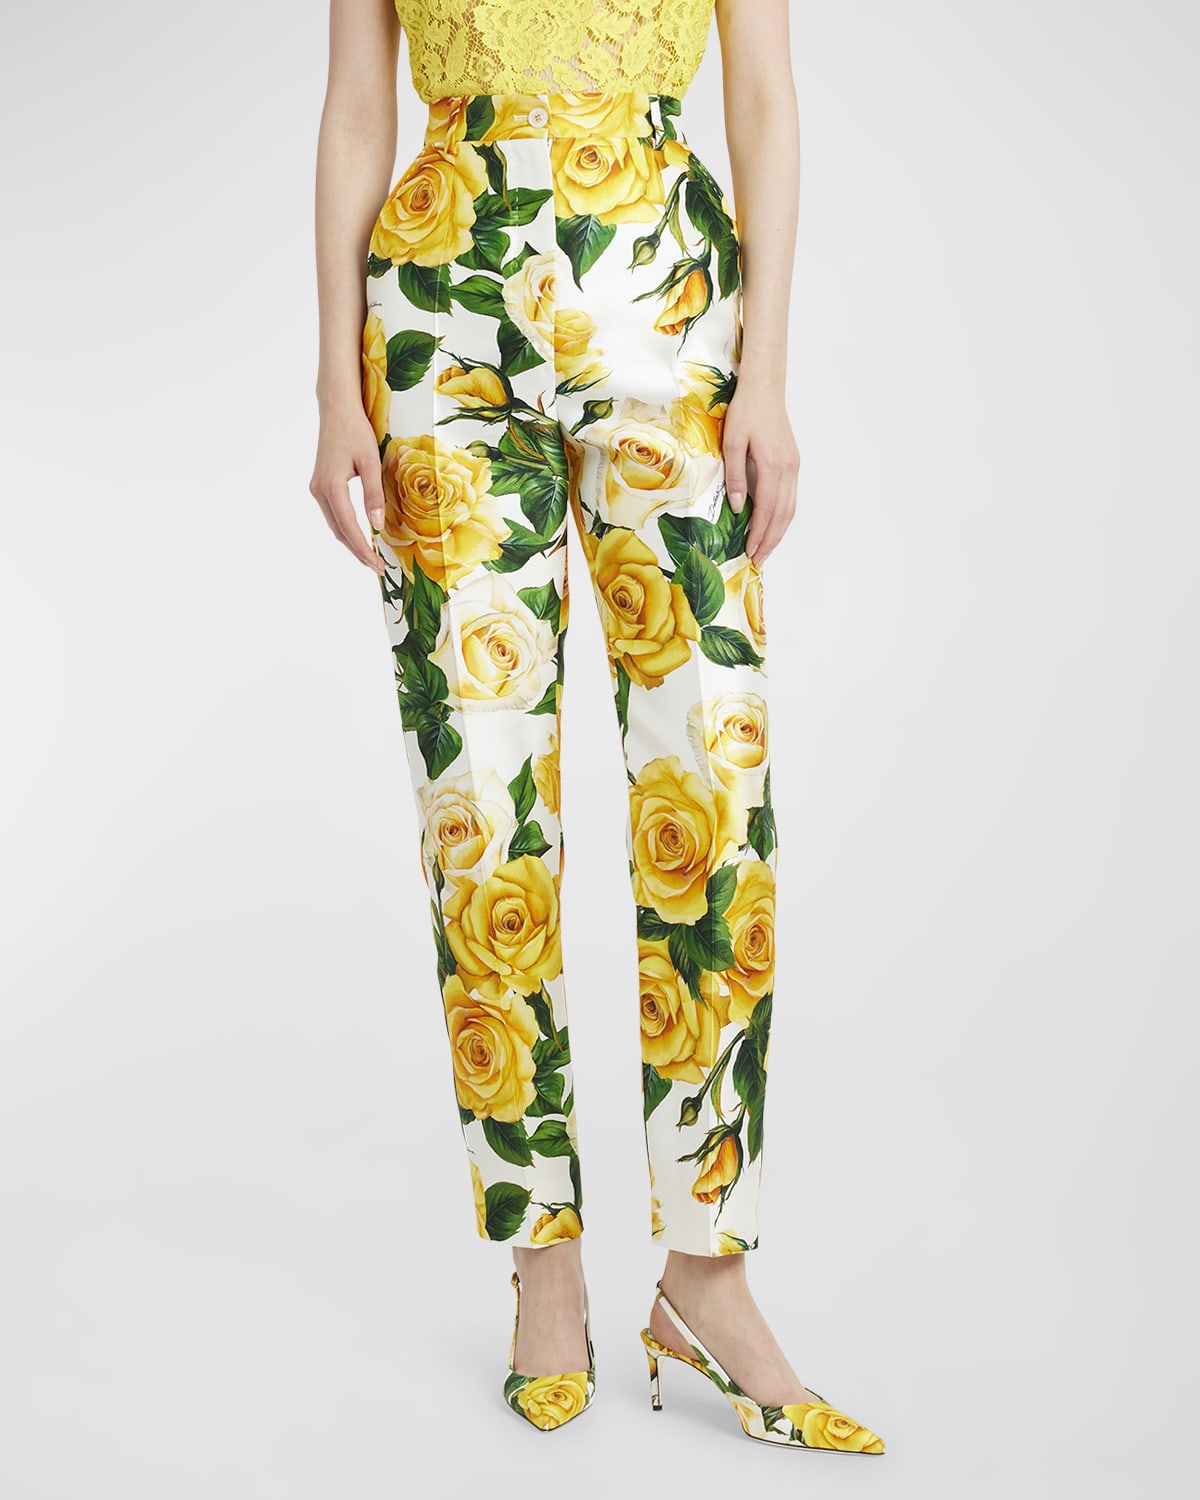 DOLCE & GABBANA YELLOW ROSE FLORAL PRINT TROUSERS